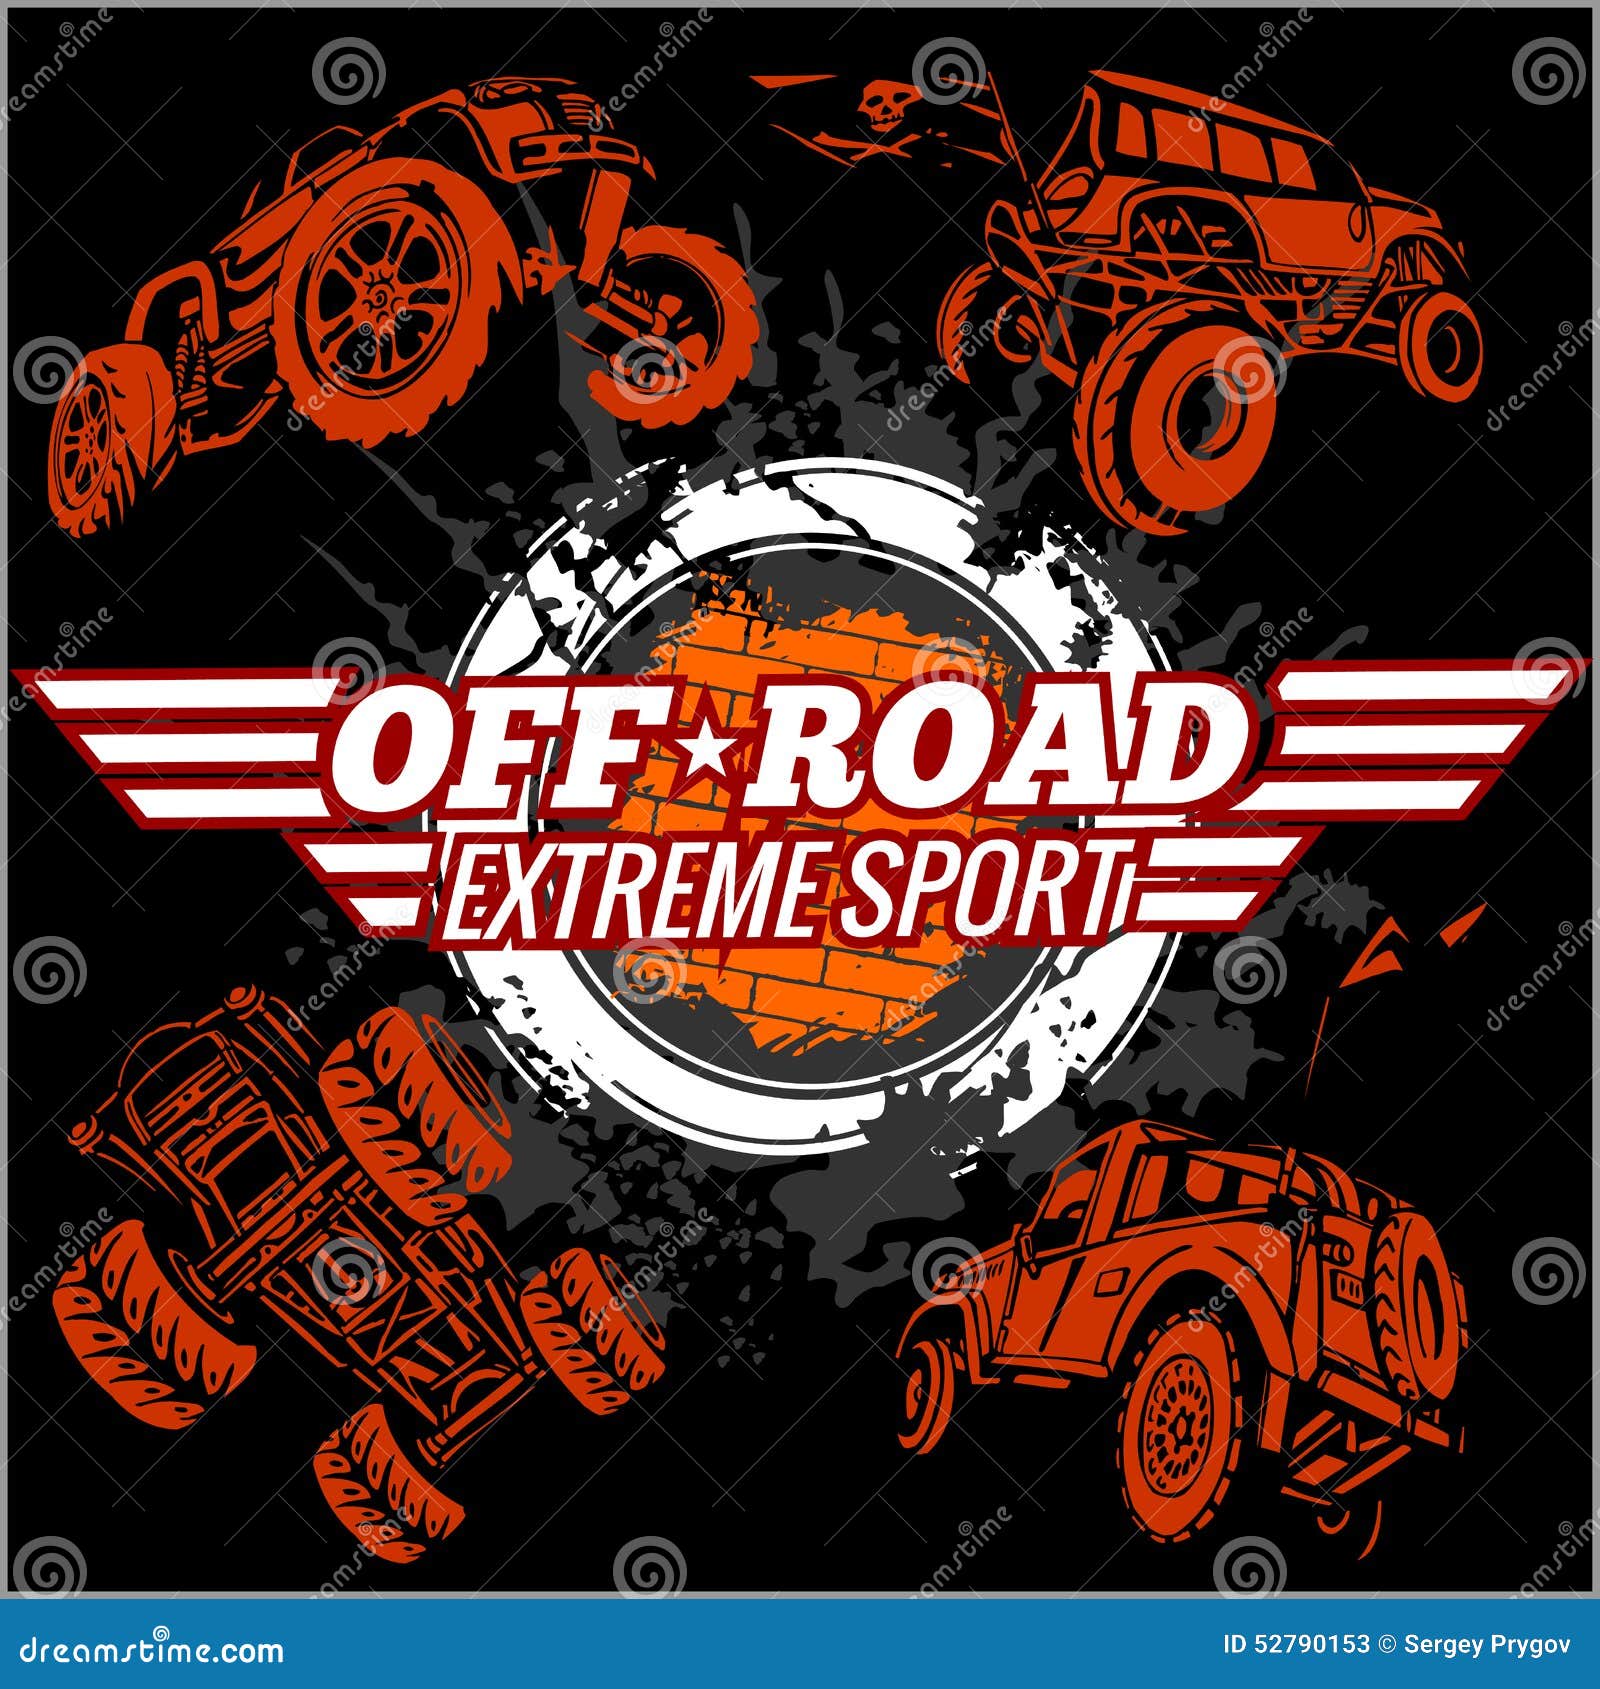  emblem with off-road cars